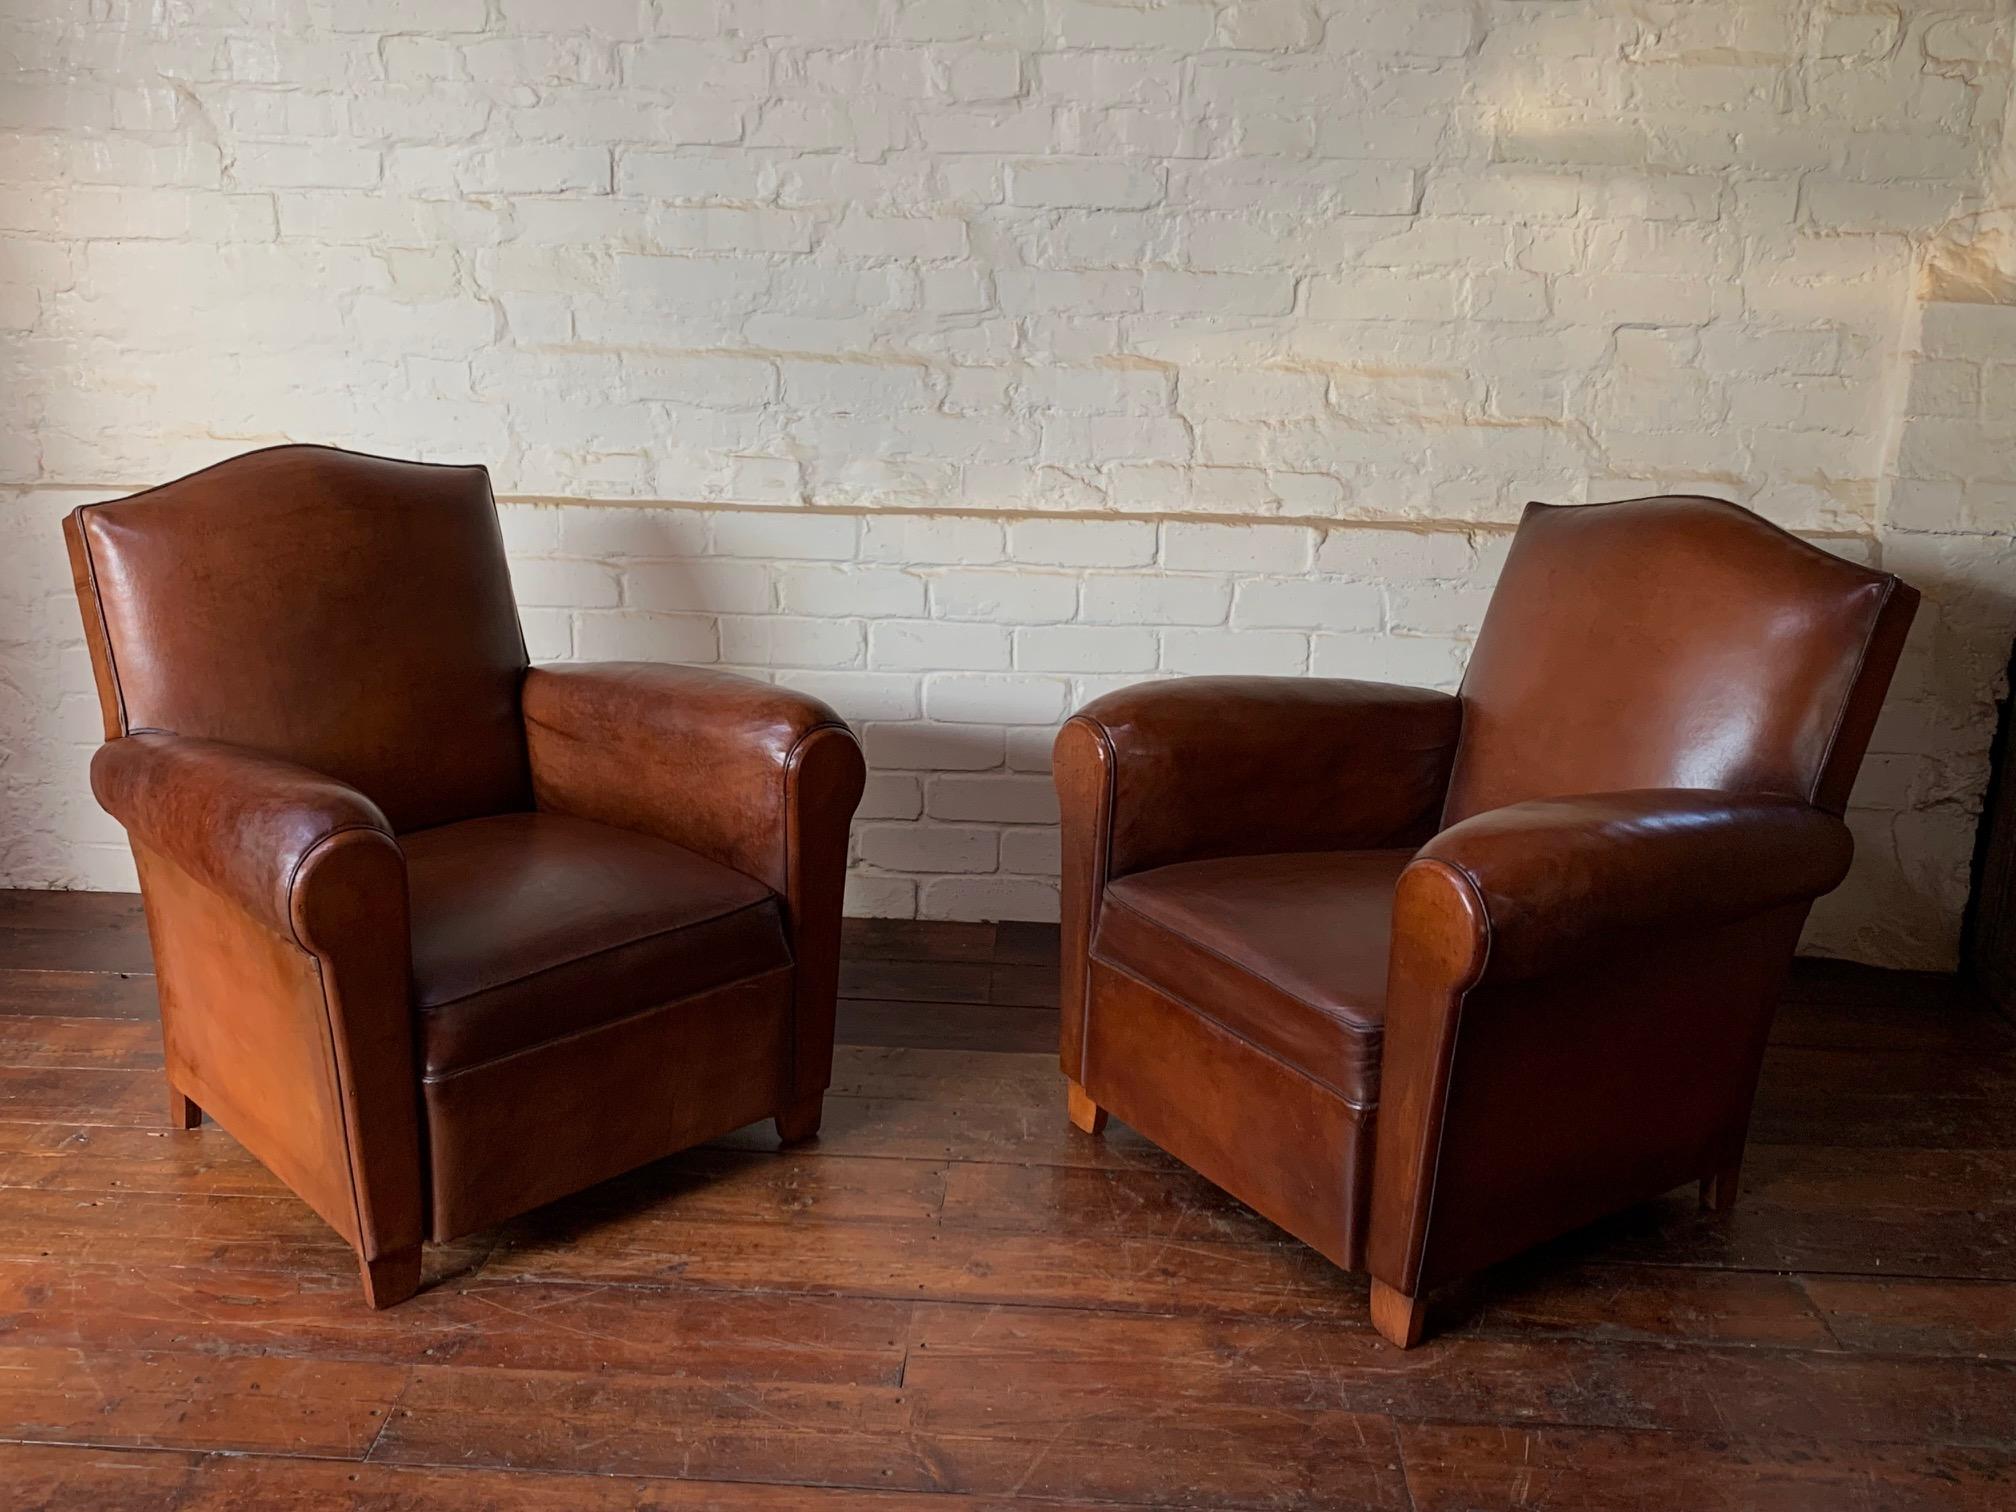 A Wonderful Pair of French Leather Club Chairs Chapeau du Gendarme Models, C1950 For Sale 1